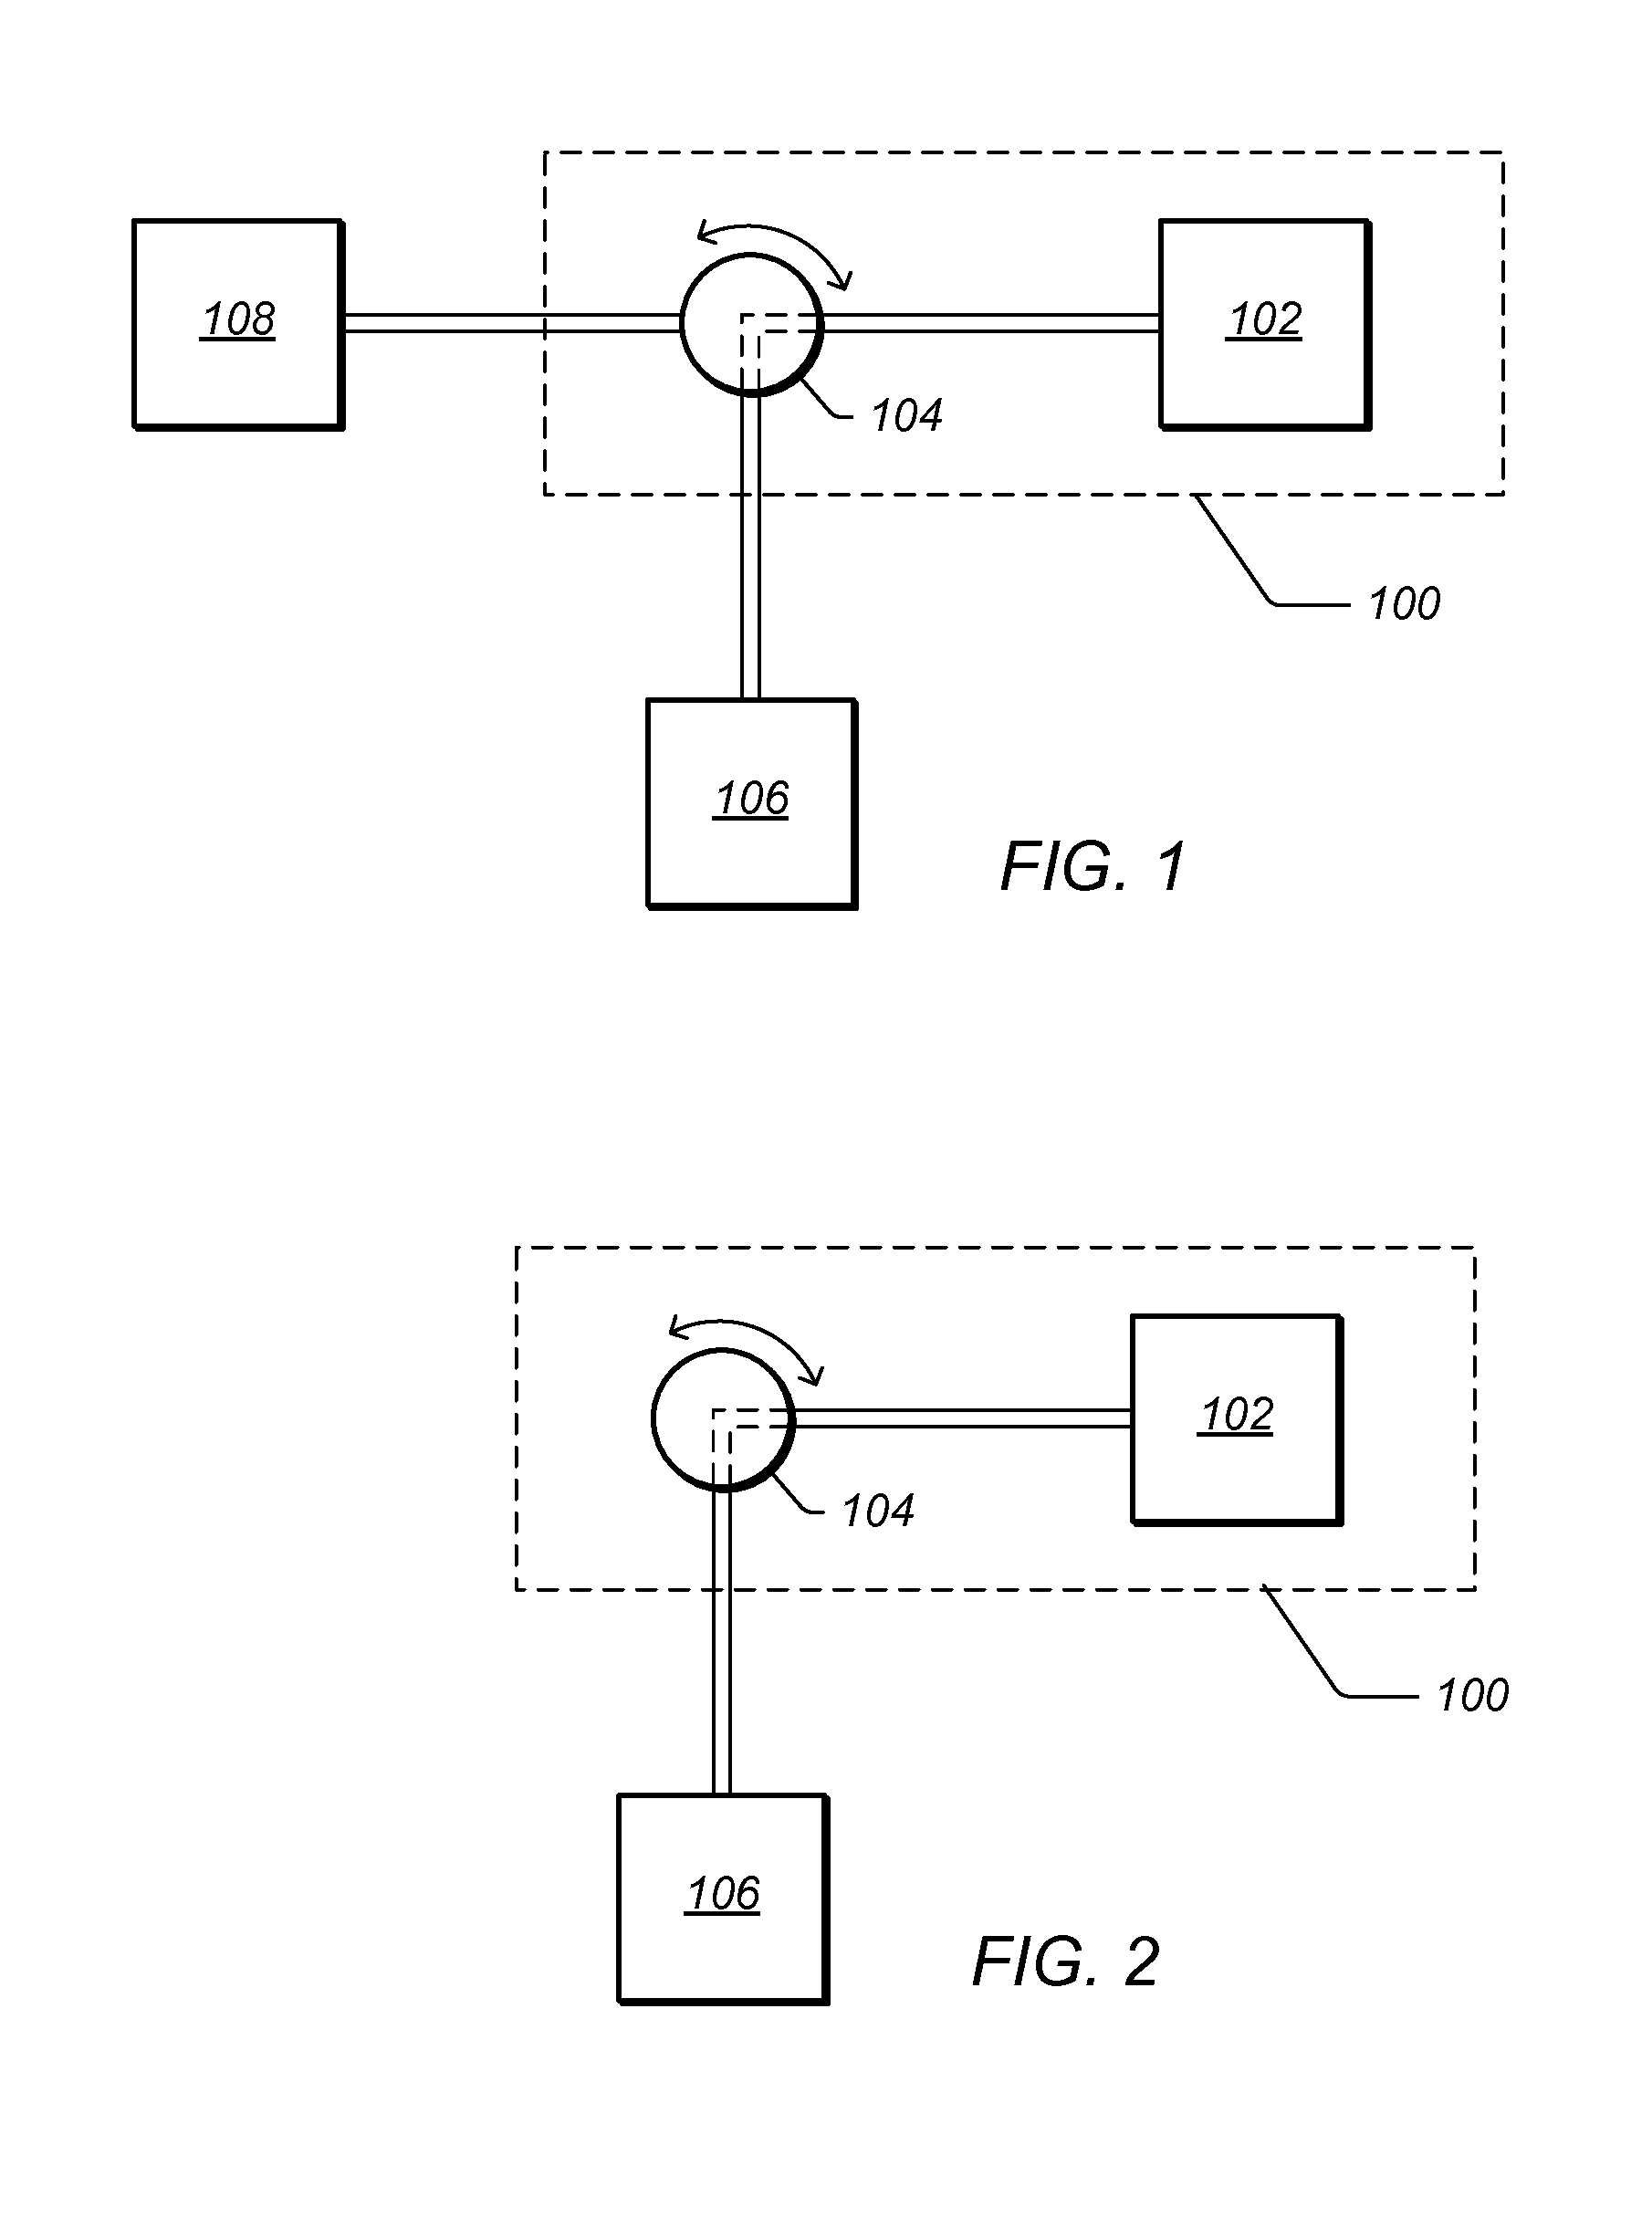 Systems, methods and apparatus for servicing a refrigeration system